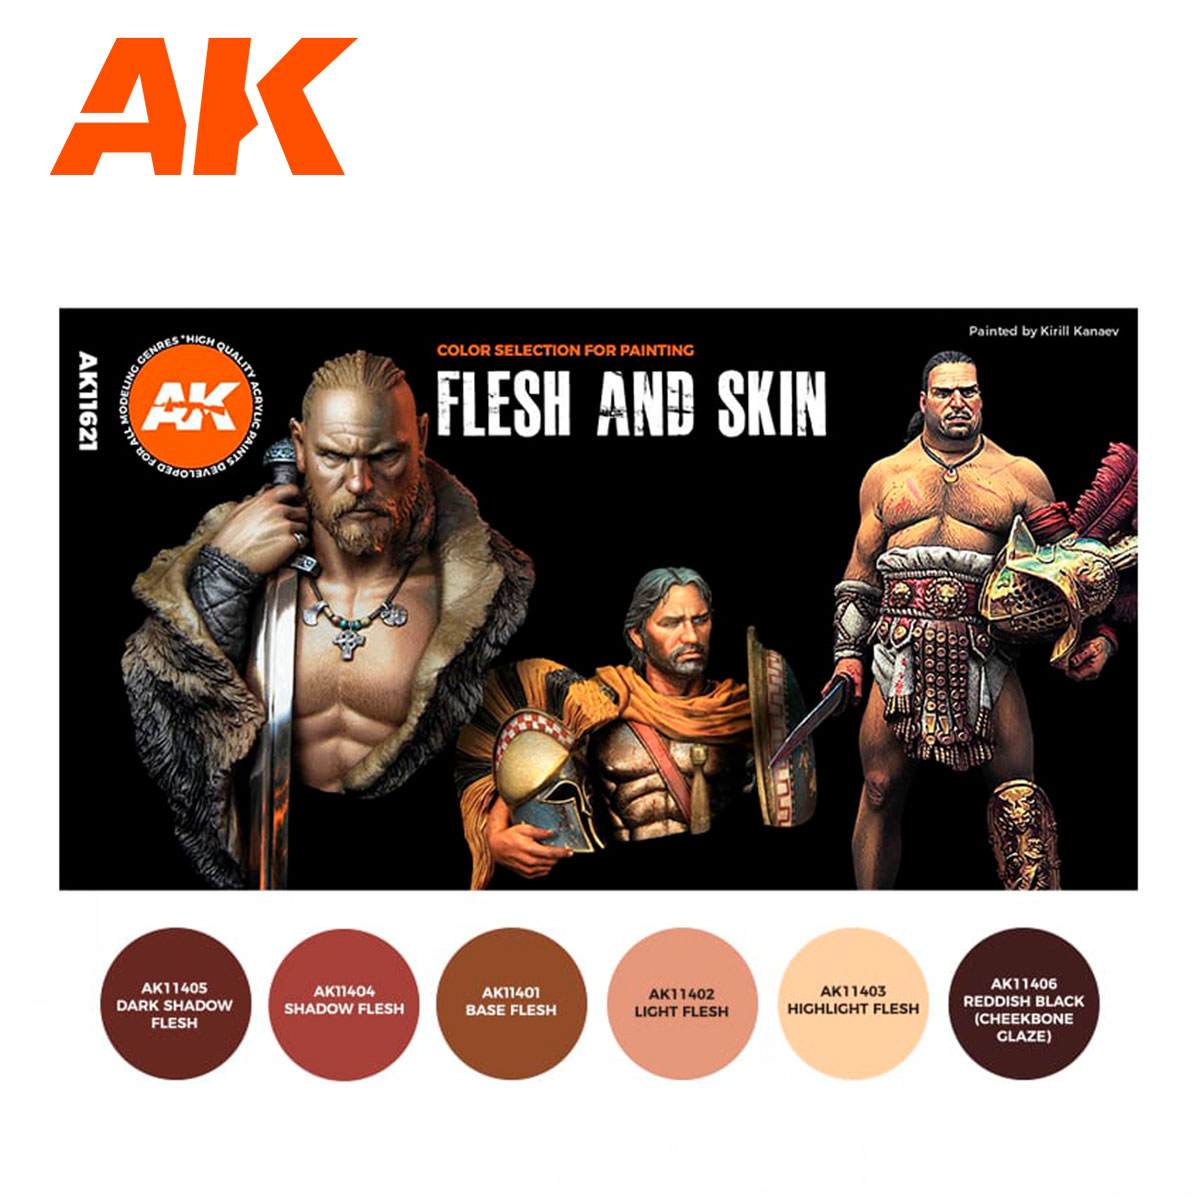 Buy FLESH AND SKIN COLORS (THE ORIGINAL SELECTION) online for 16,50€